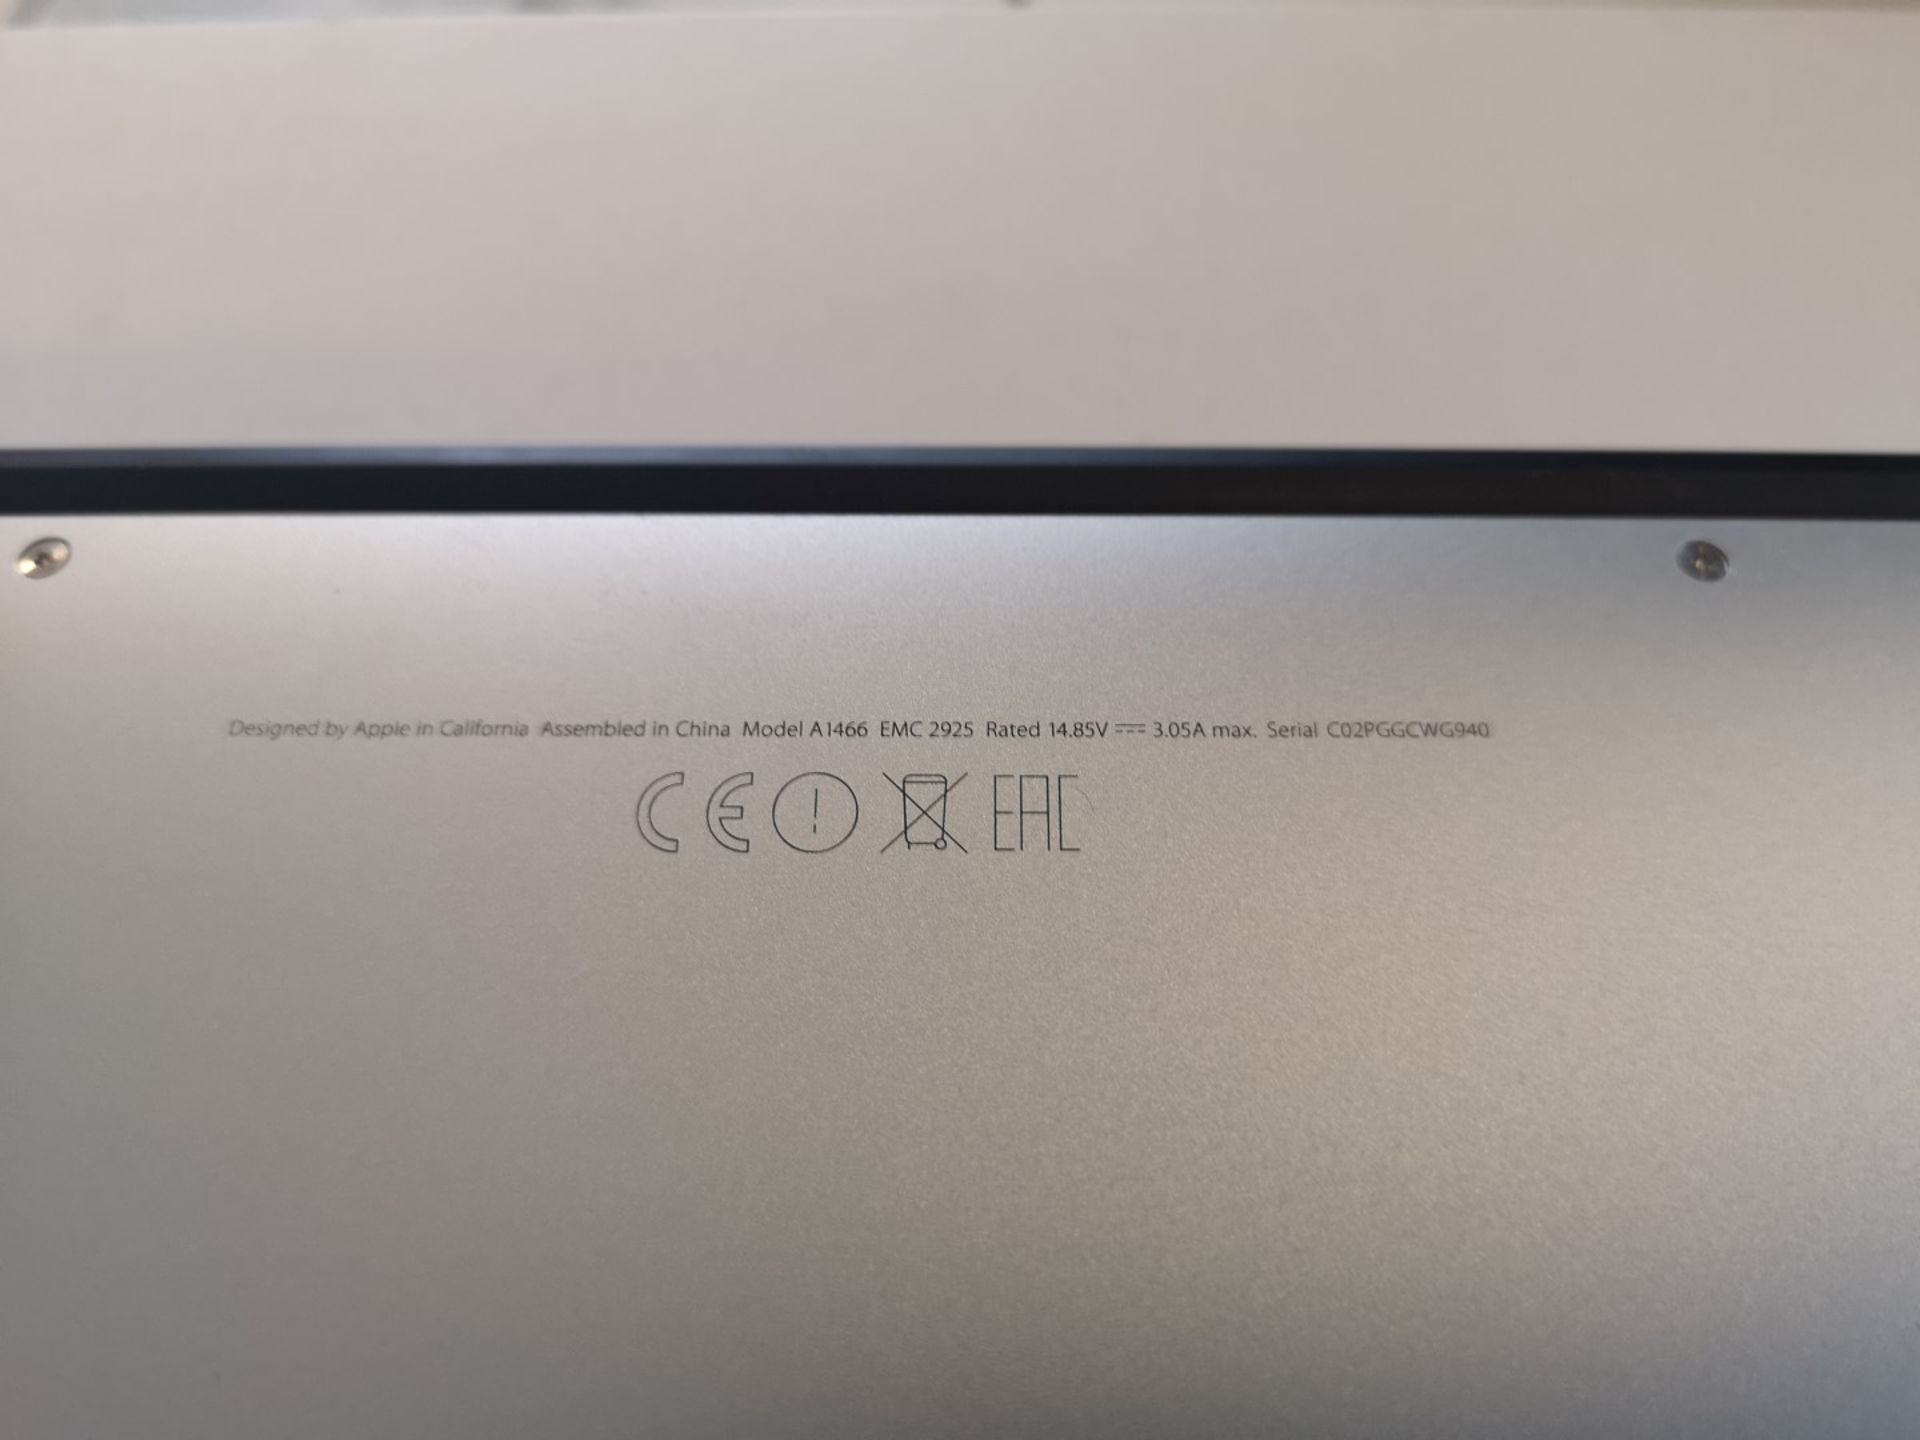 Apple MacBook Air "Core i5" 1.6 13" (Early 2015) - Image 3 of 4